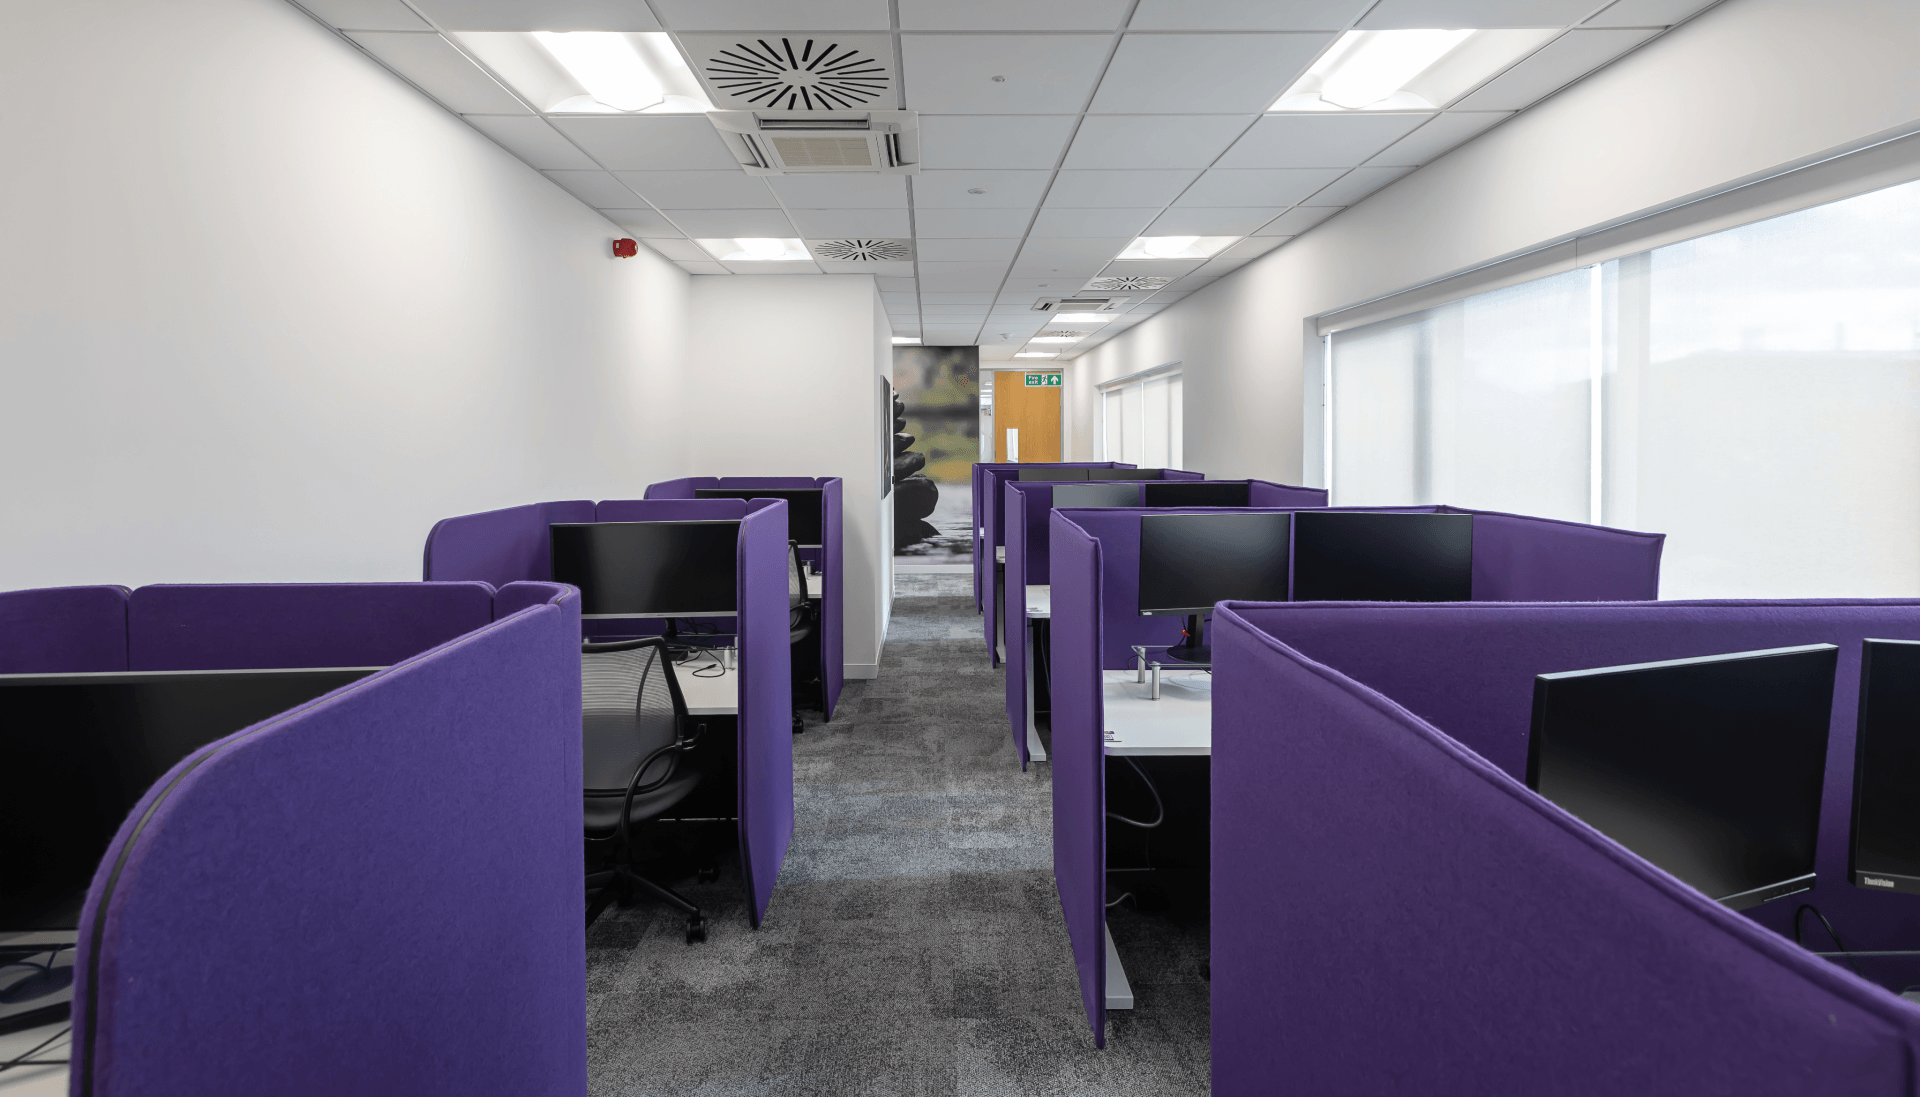 A row of purple cubicles with computers in an office.